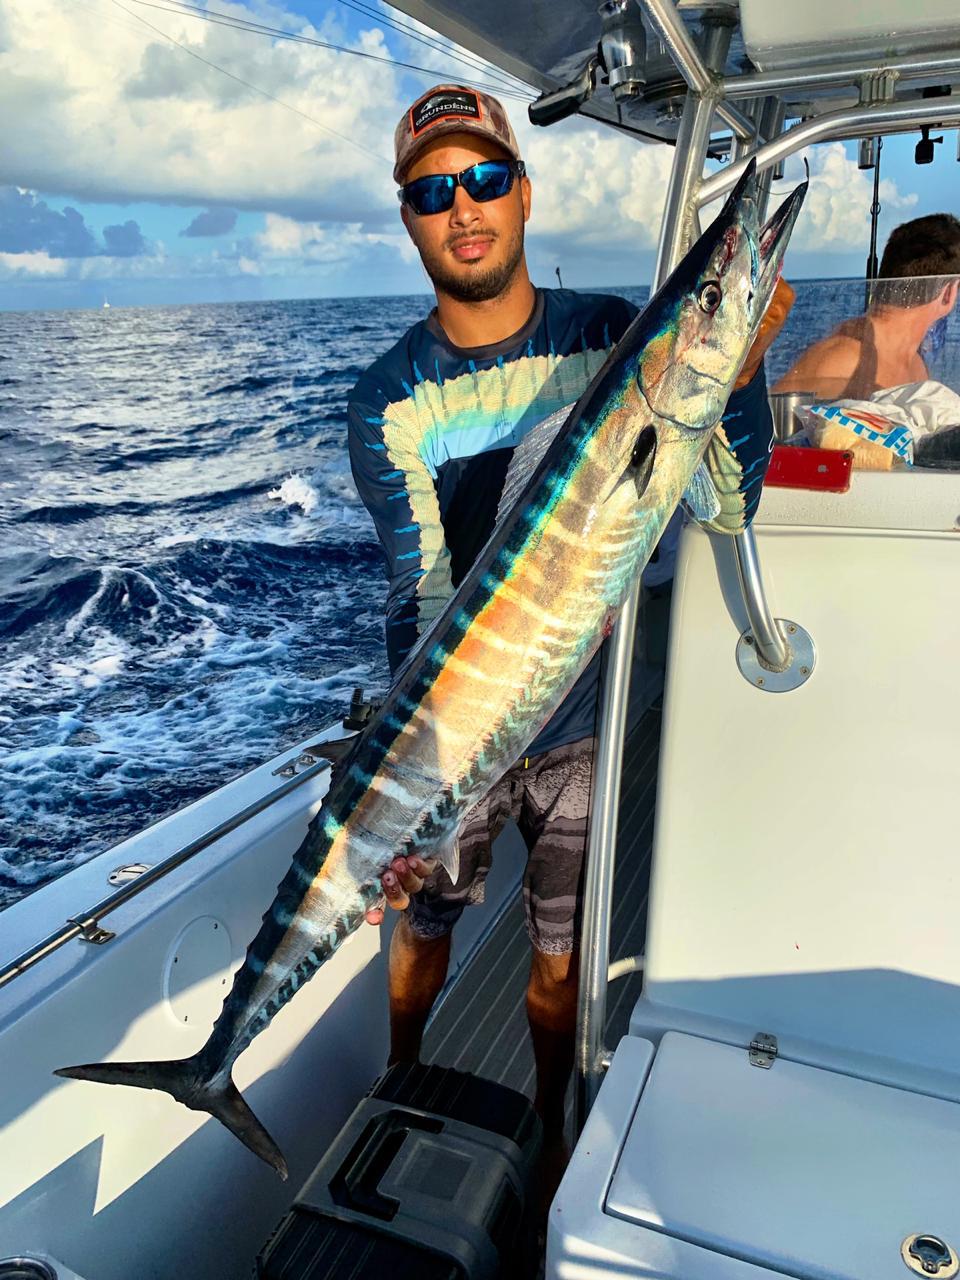 Catching a Wintering Wahoo in Belize Waters